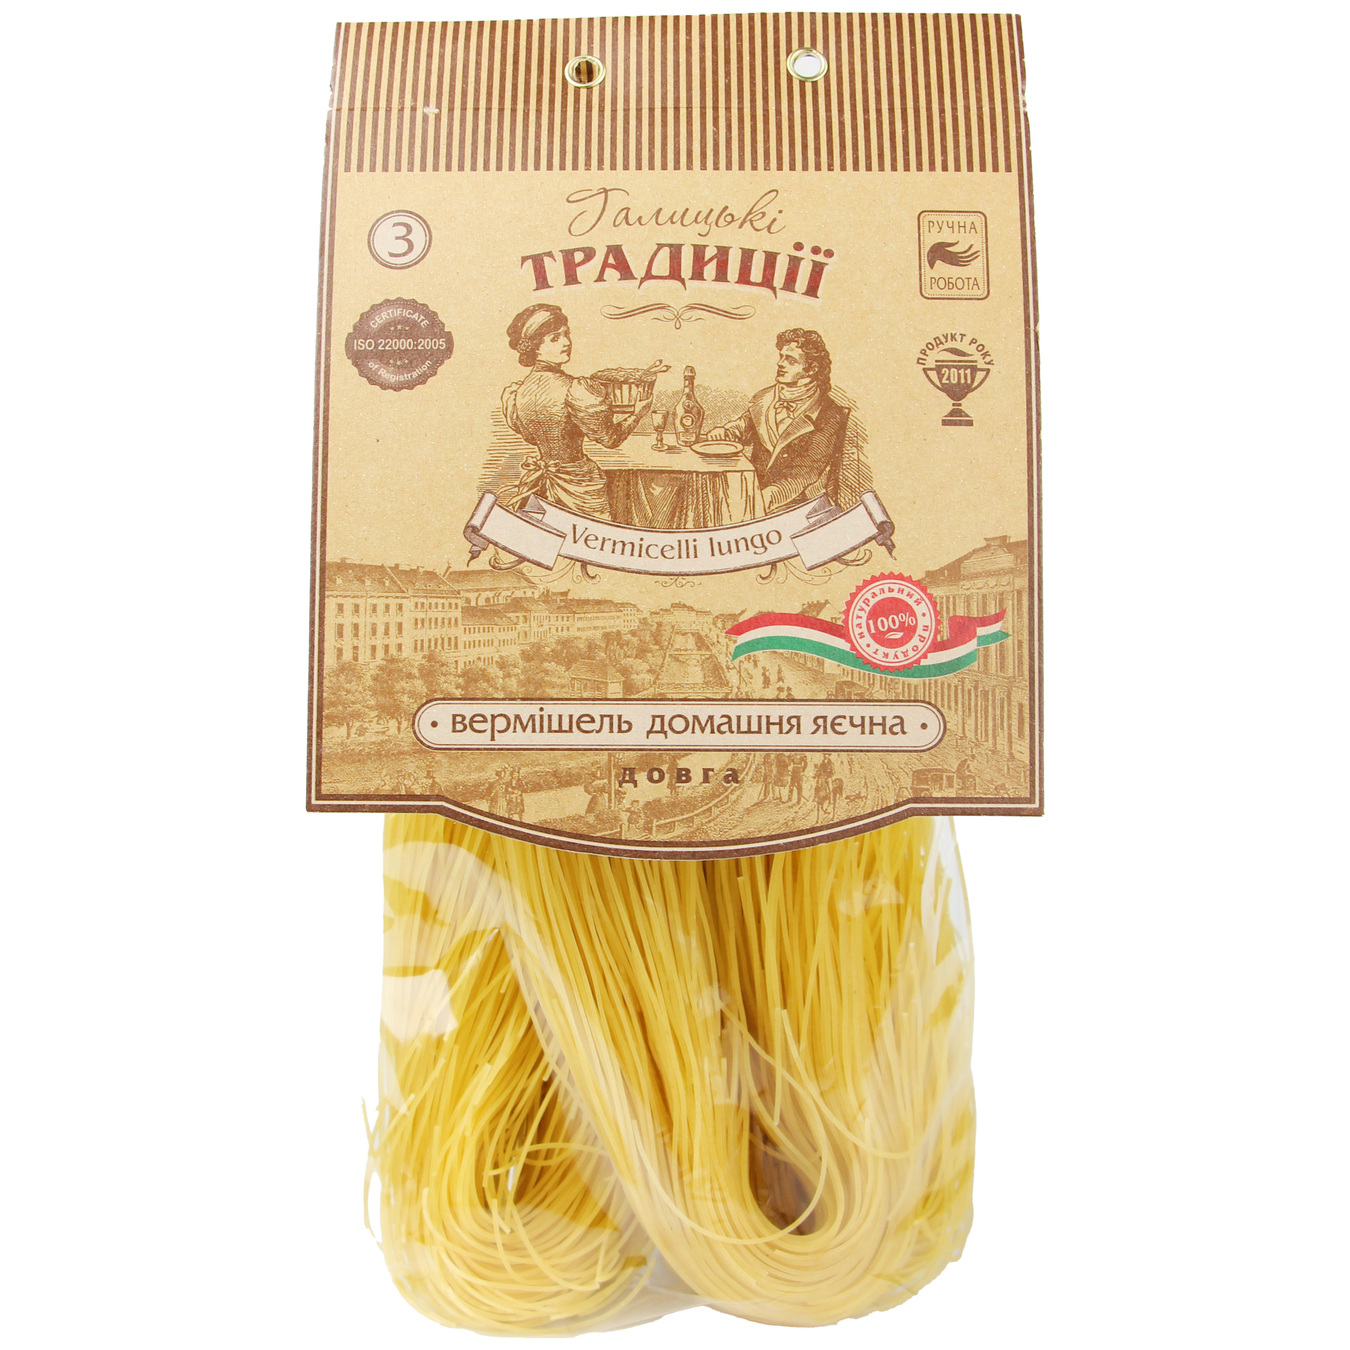 Galician Traditions Homemade Egg Vermicelli Lungo Pasta 400g